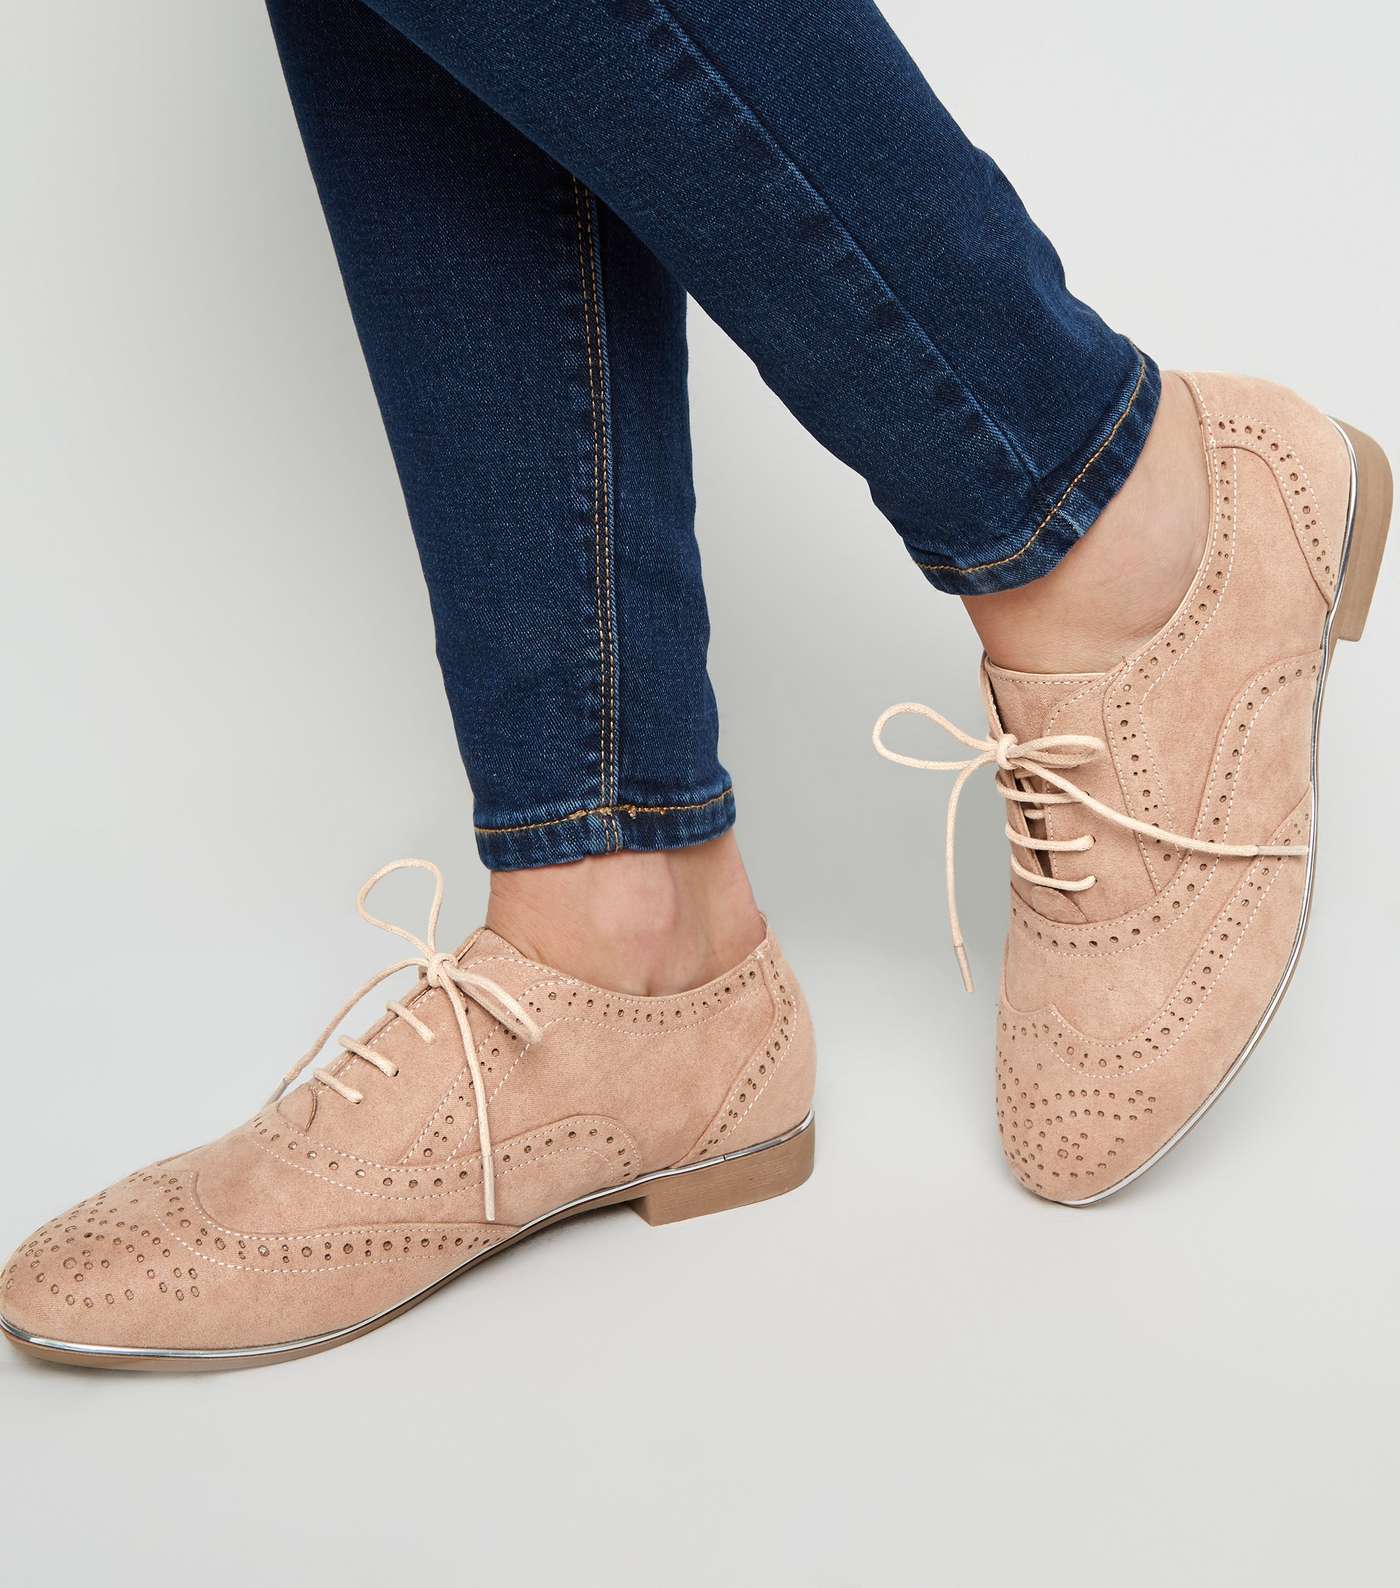 Wide Fit Nude Suedette Piped Edge Brogues Image 2